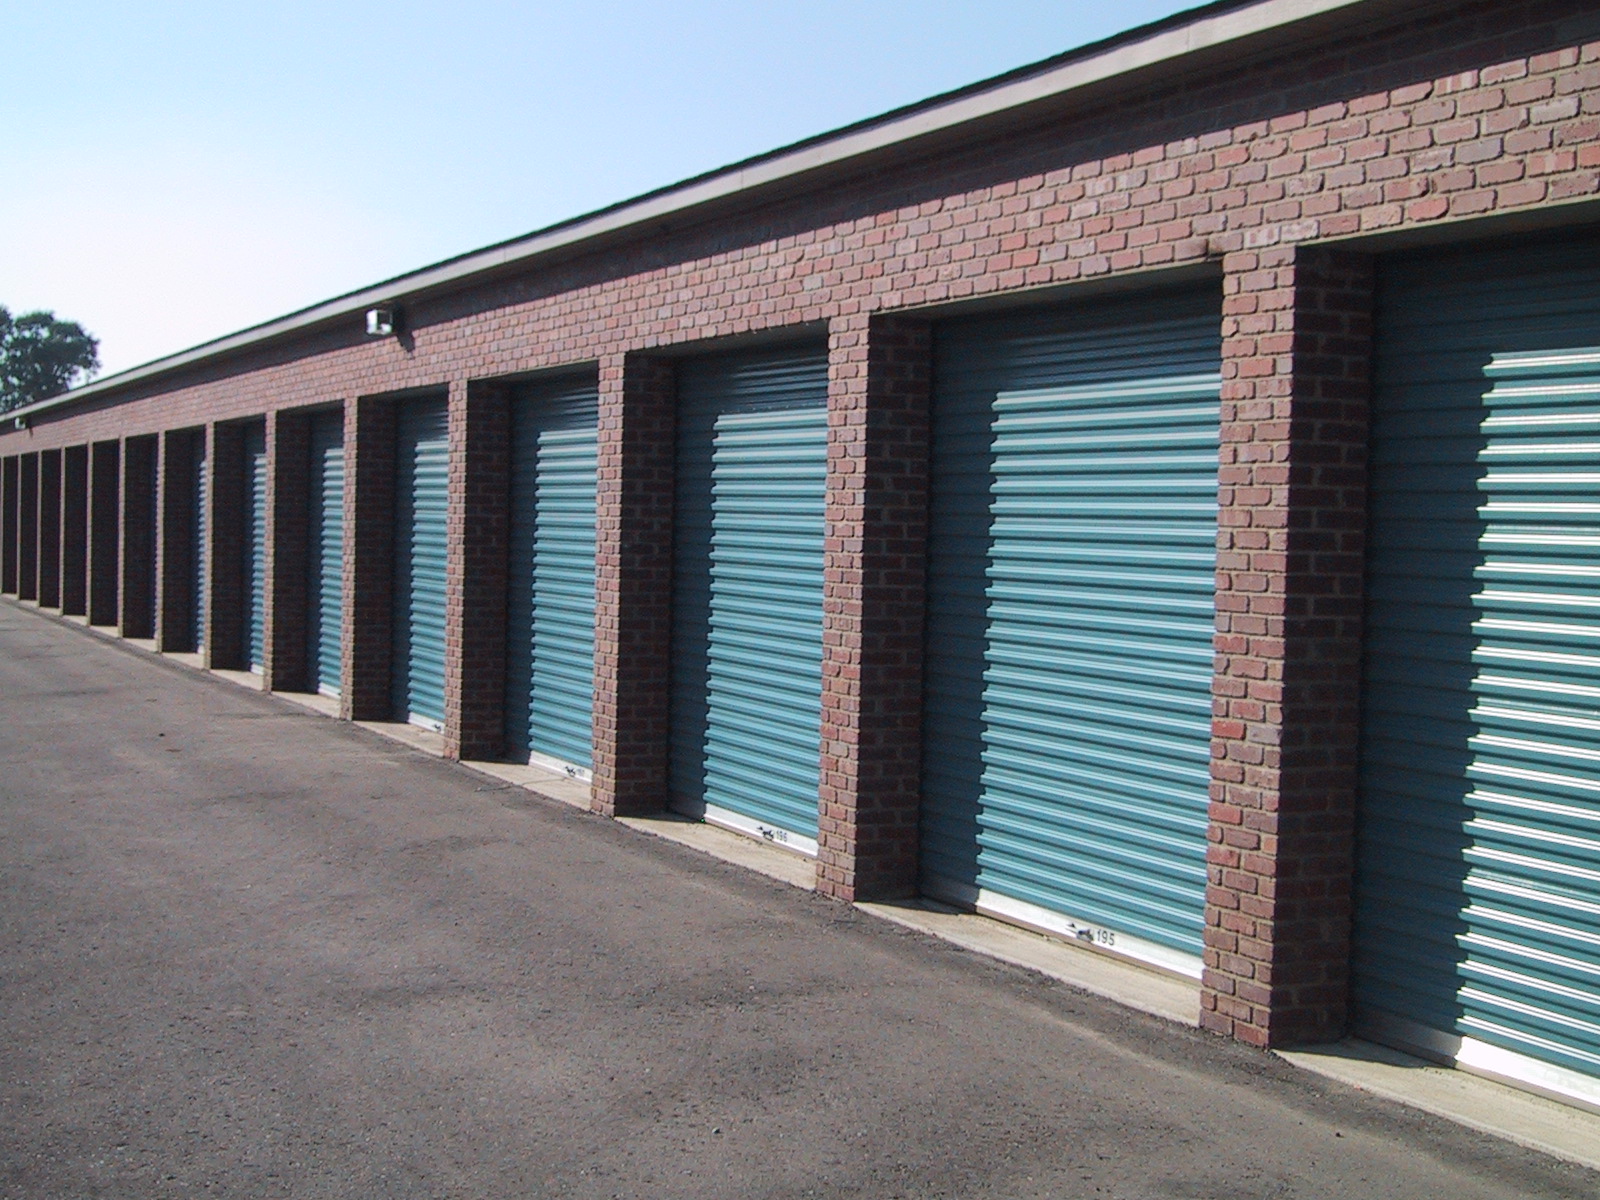 Financial Projections Prove Self Storage is a Great Business - If ...